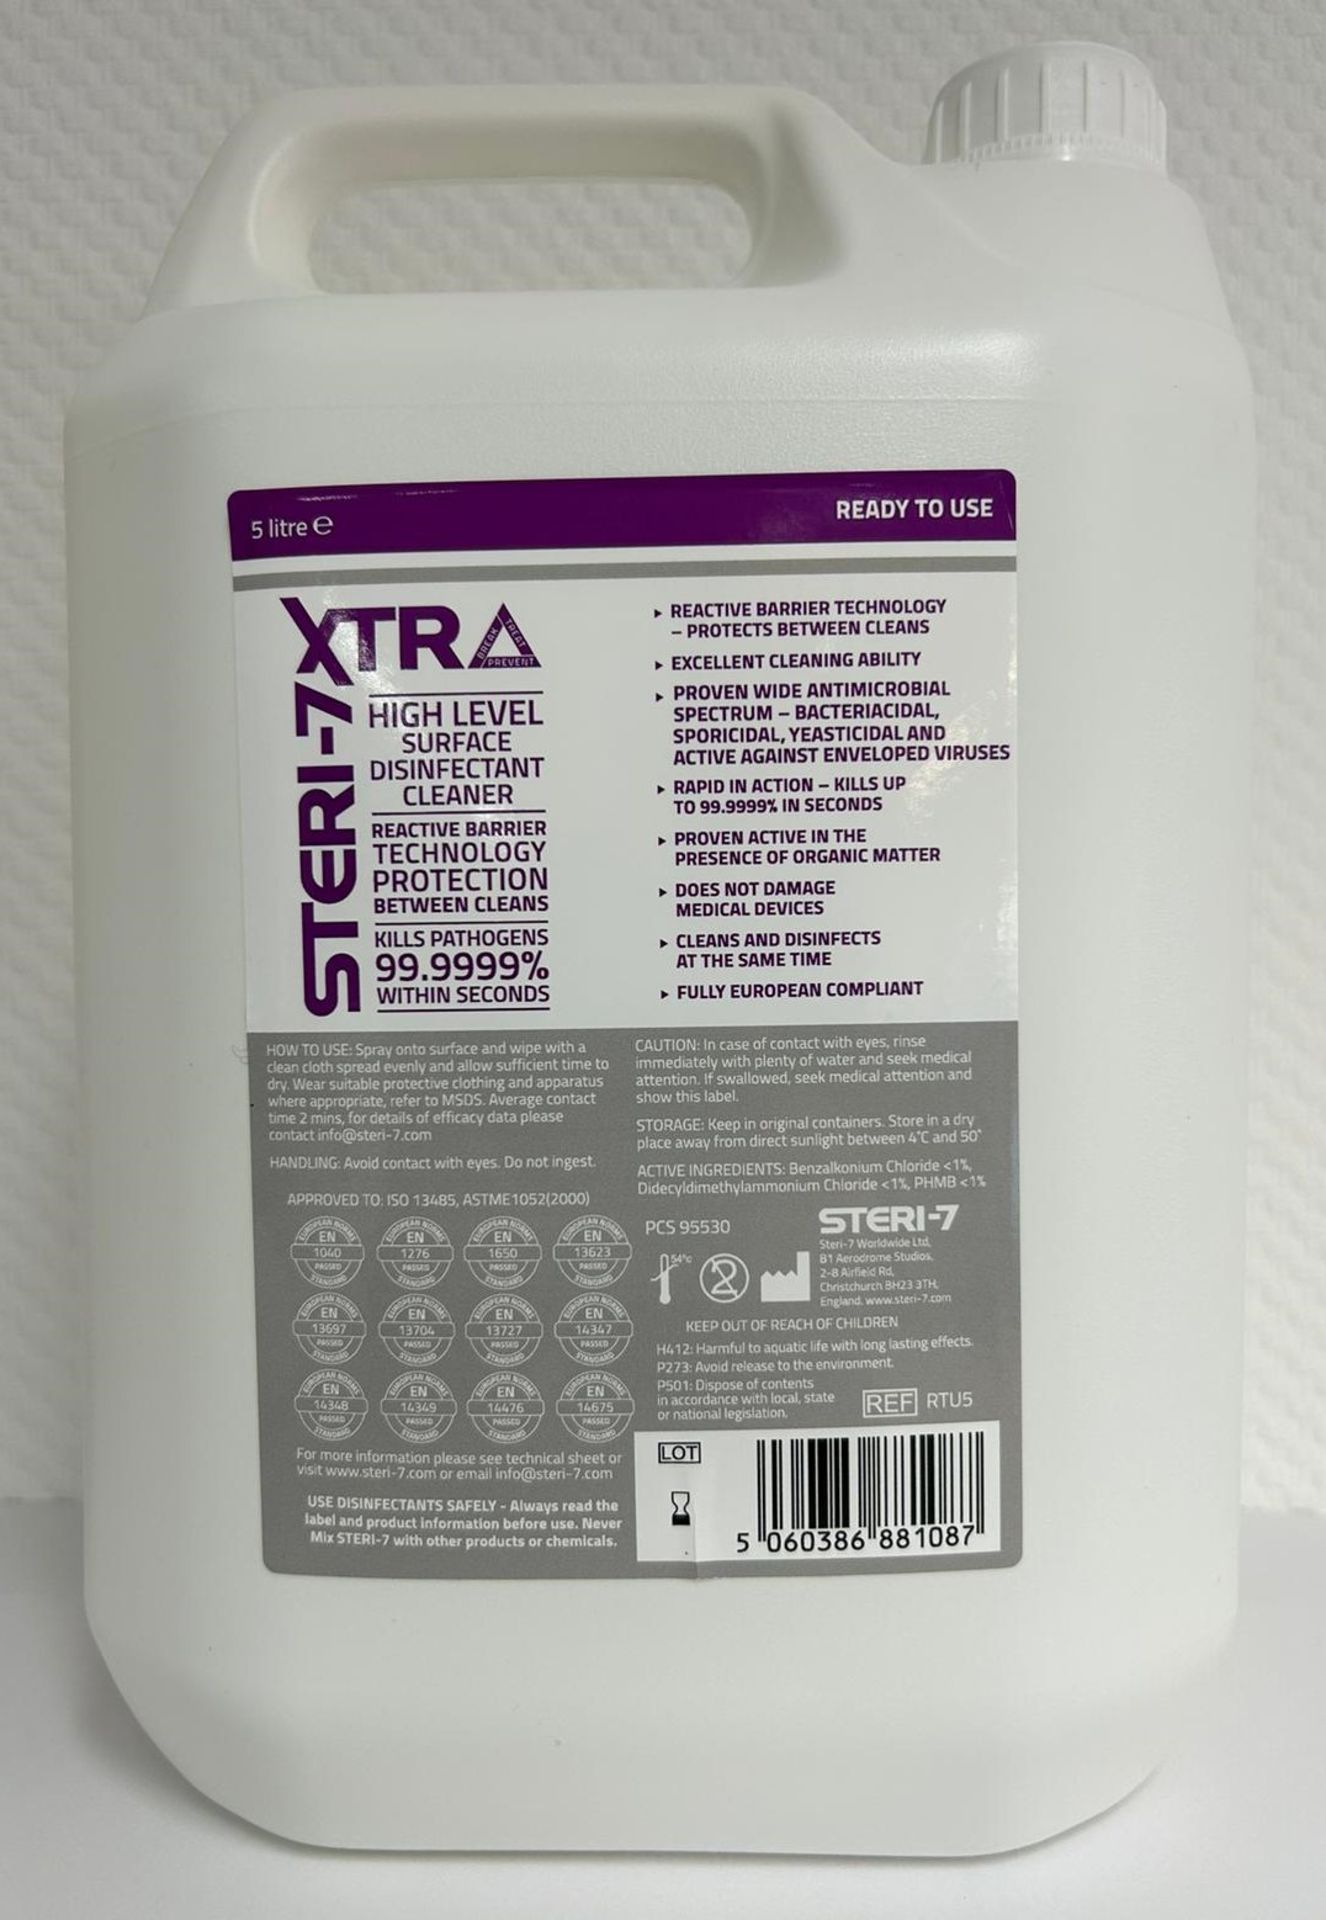 8 x Steri-7 5L Bottles of Xtra High Level Surface Disinfectant Cleaner - Ready to Use (2 outer